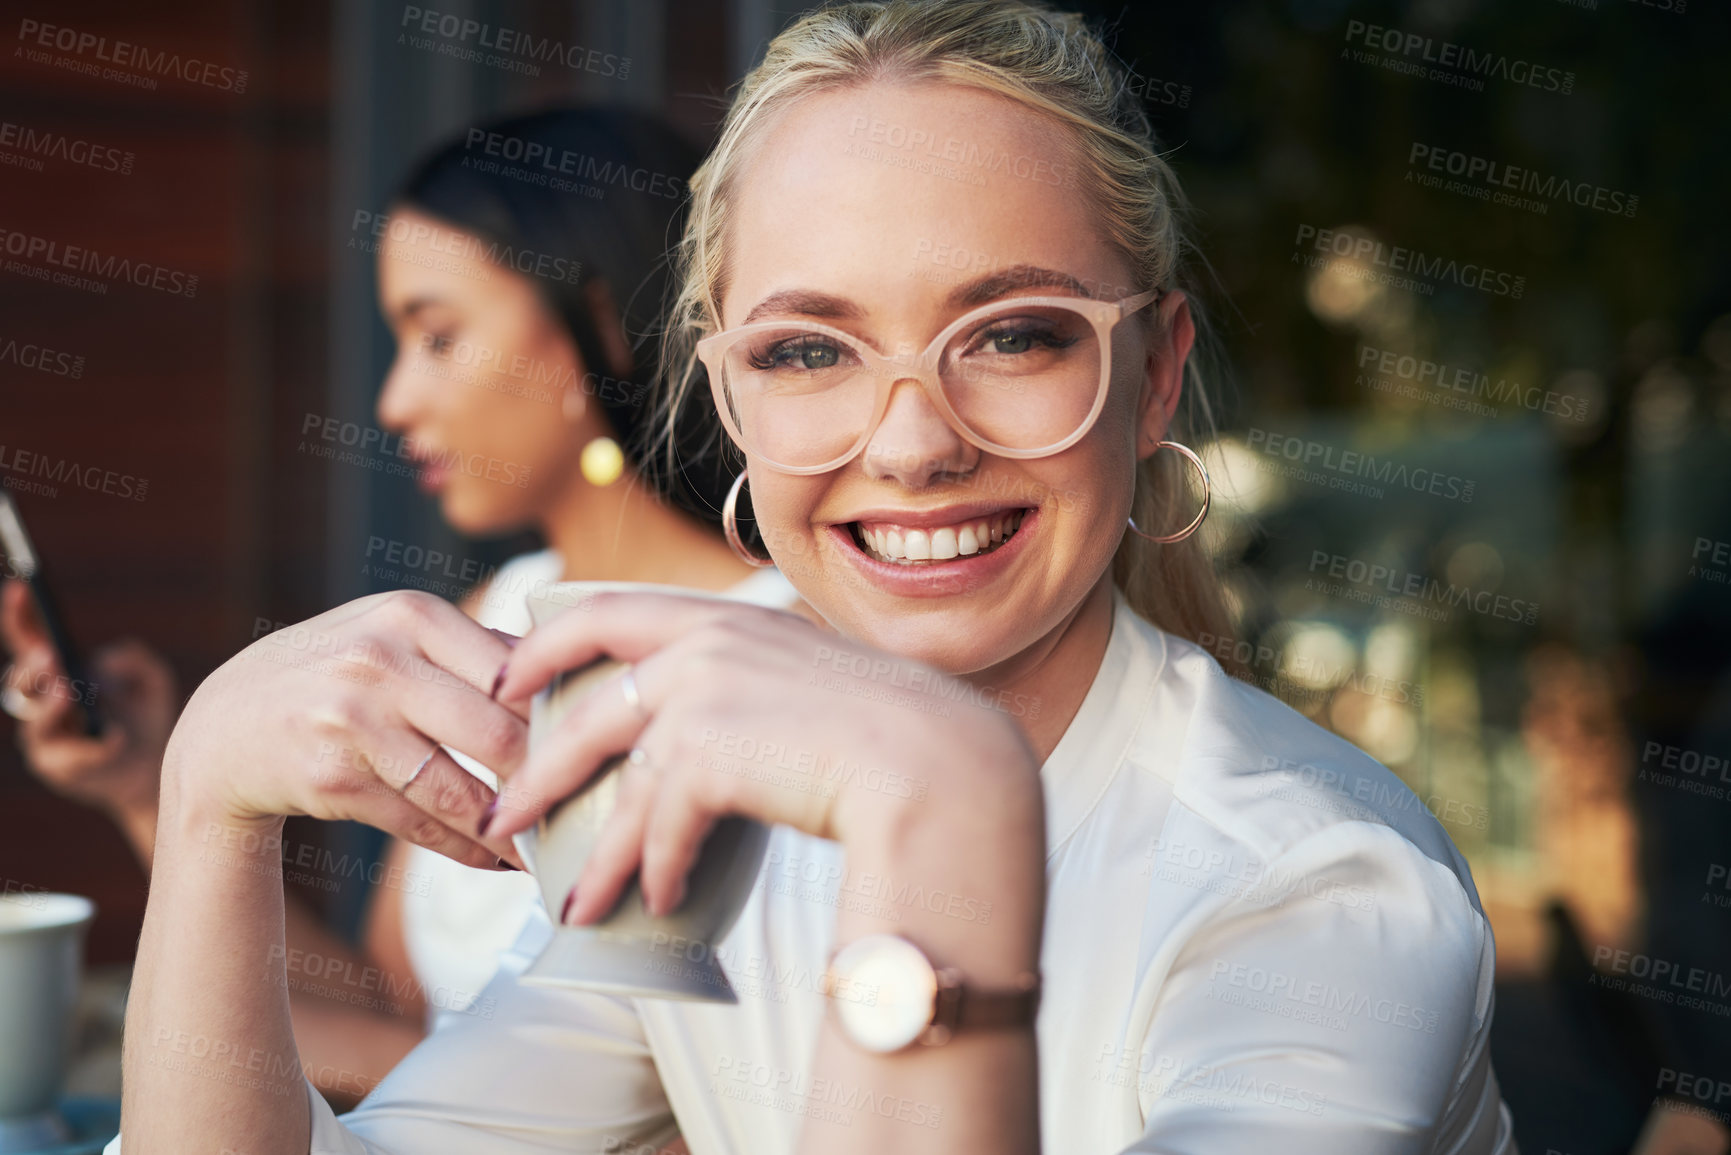 Buy stock photo Defocused shot of a young woman enjoying a cup of coffee at a cafe